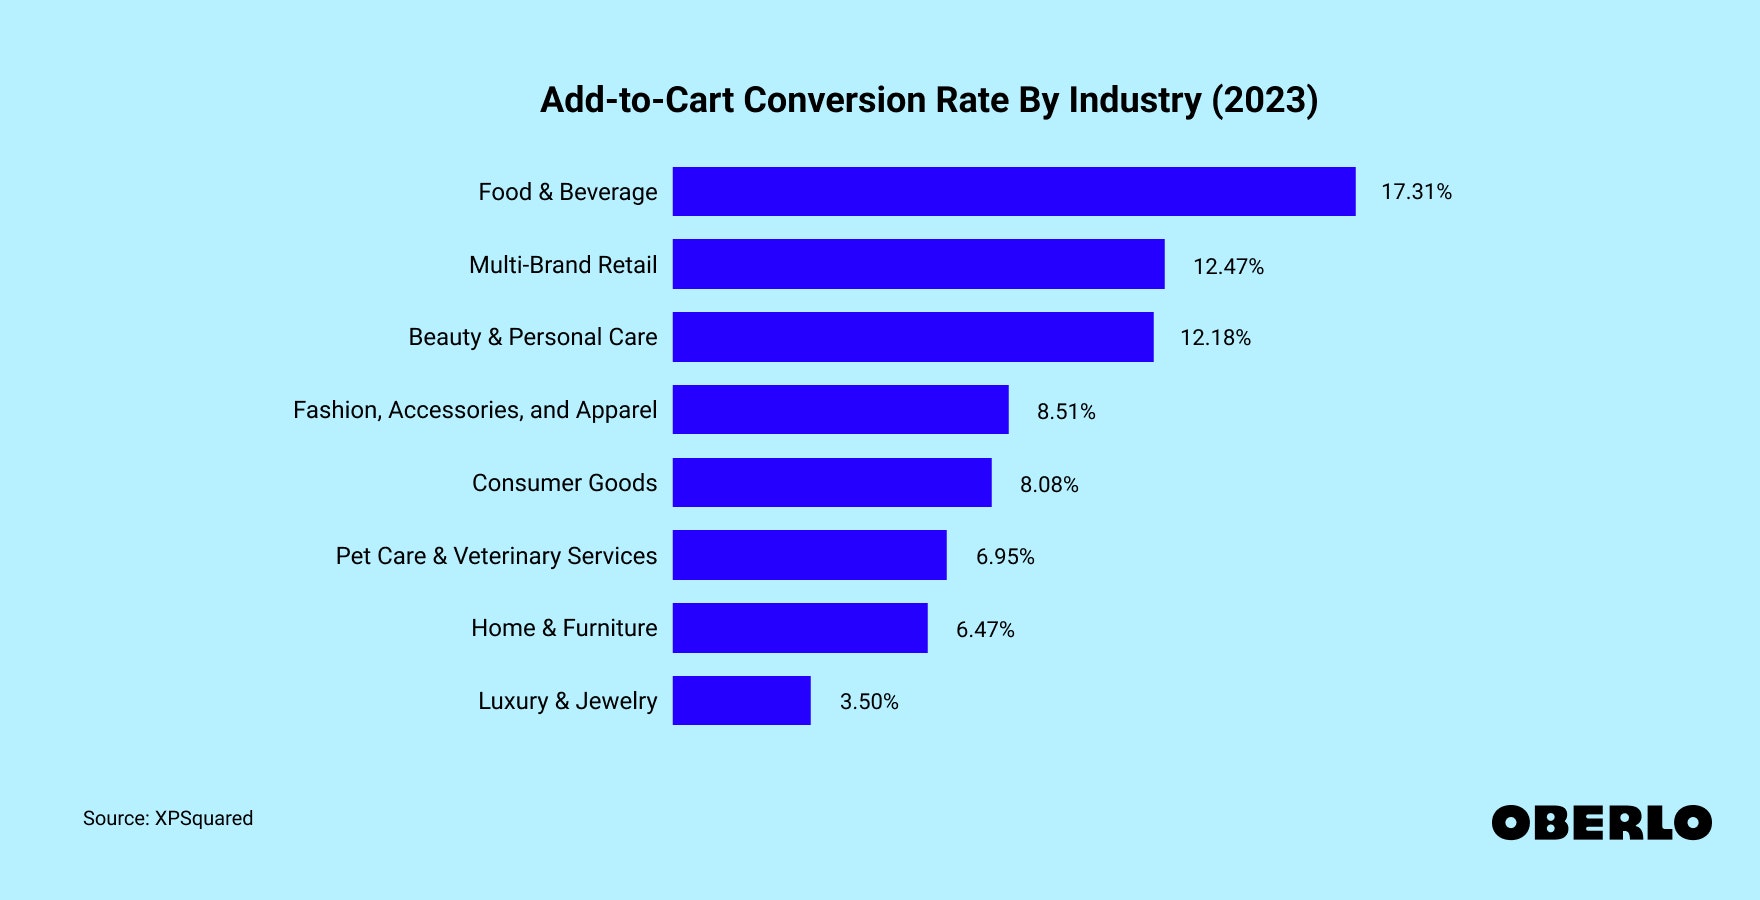 Chart showing the Add-to-Cart Conversion Rate By Industry